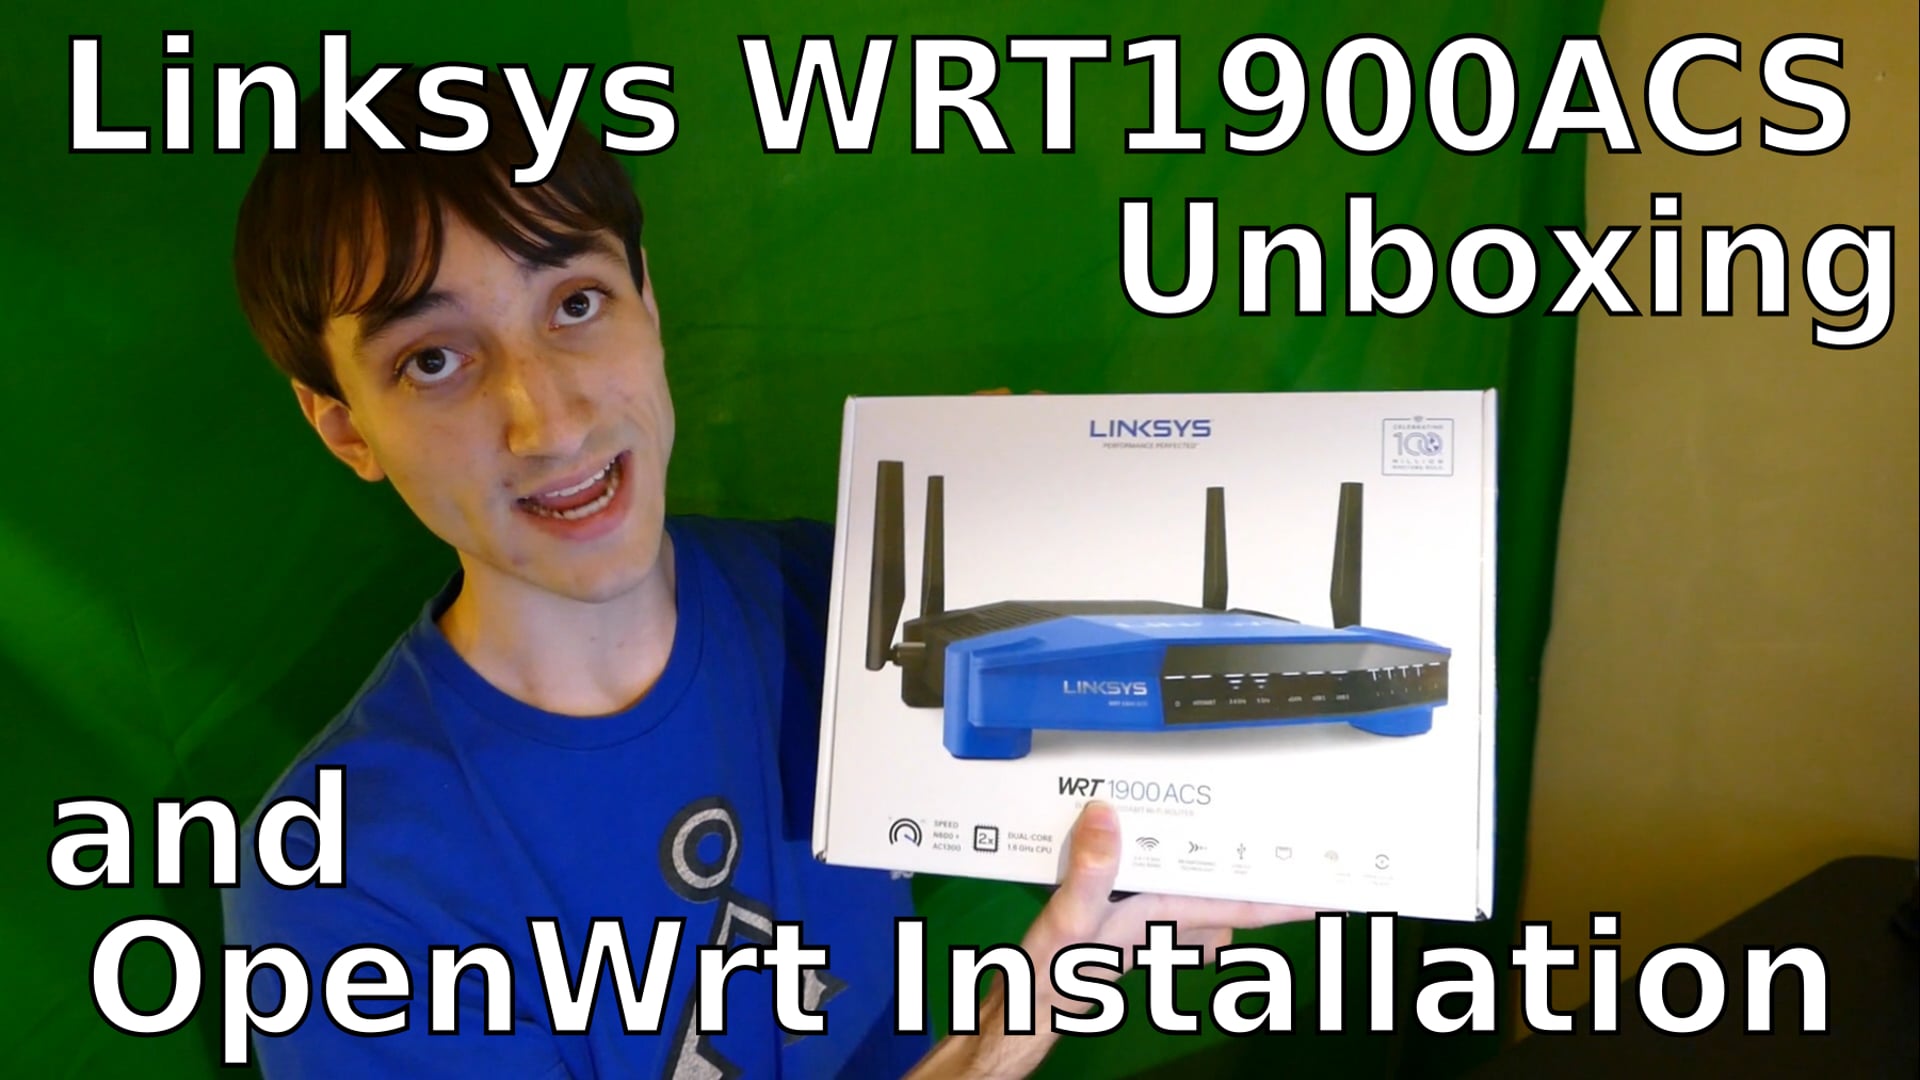 Linksys WRT1900ACS Unboxing & OpenWRT Installation